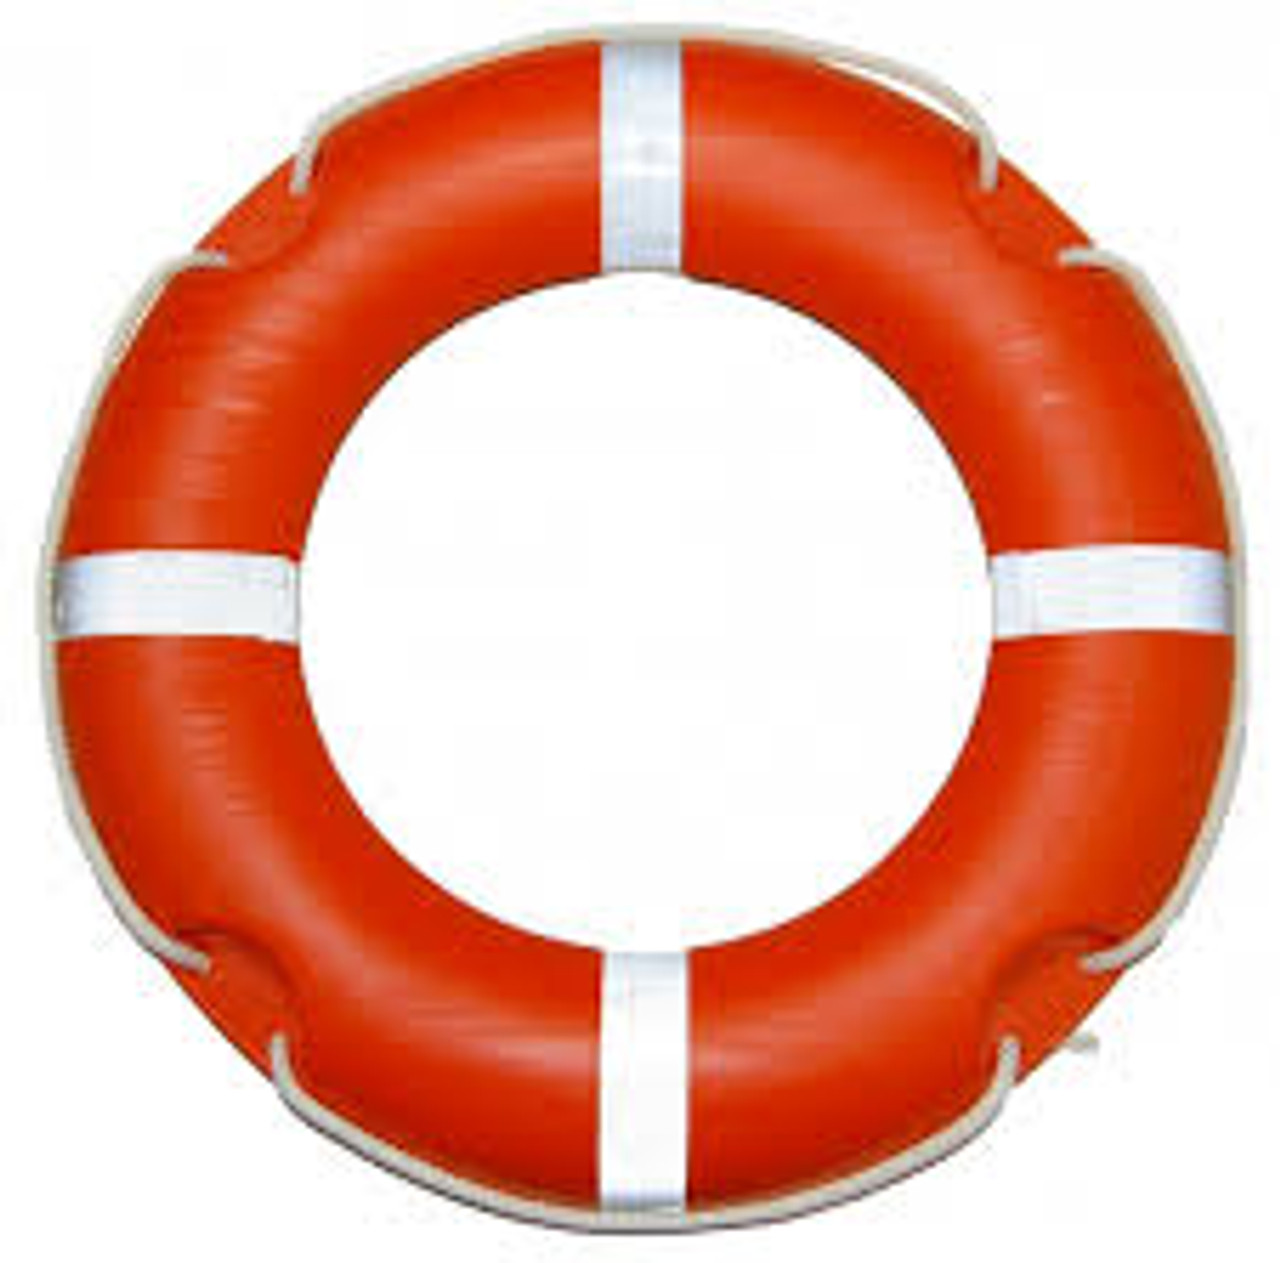 IMPA 330160 *Lifebuoy weight over 4 Kg MED approved*